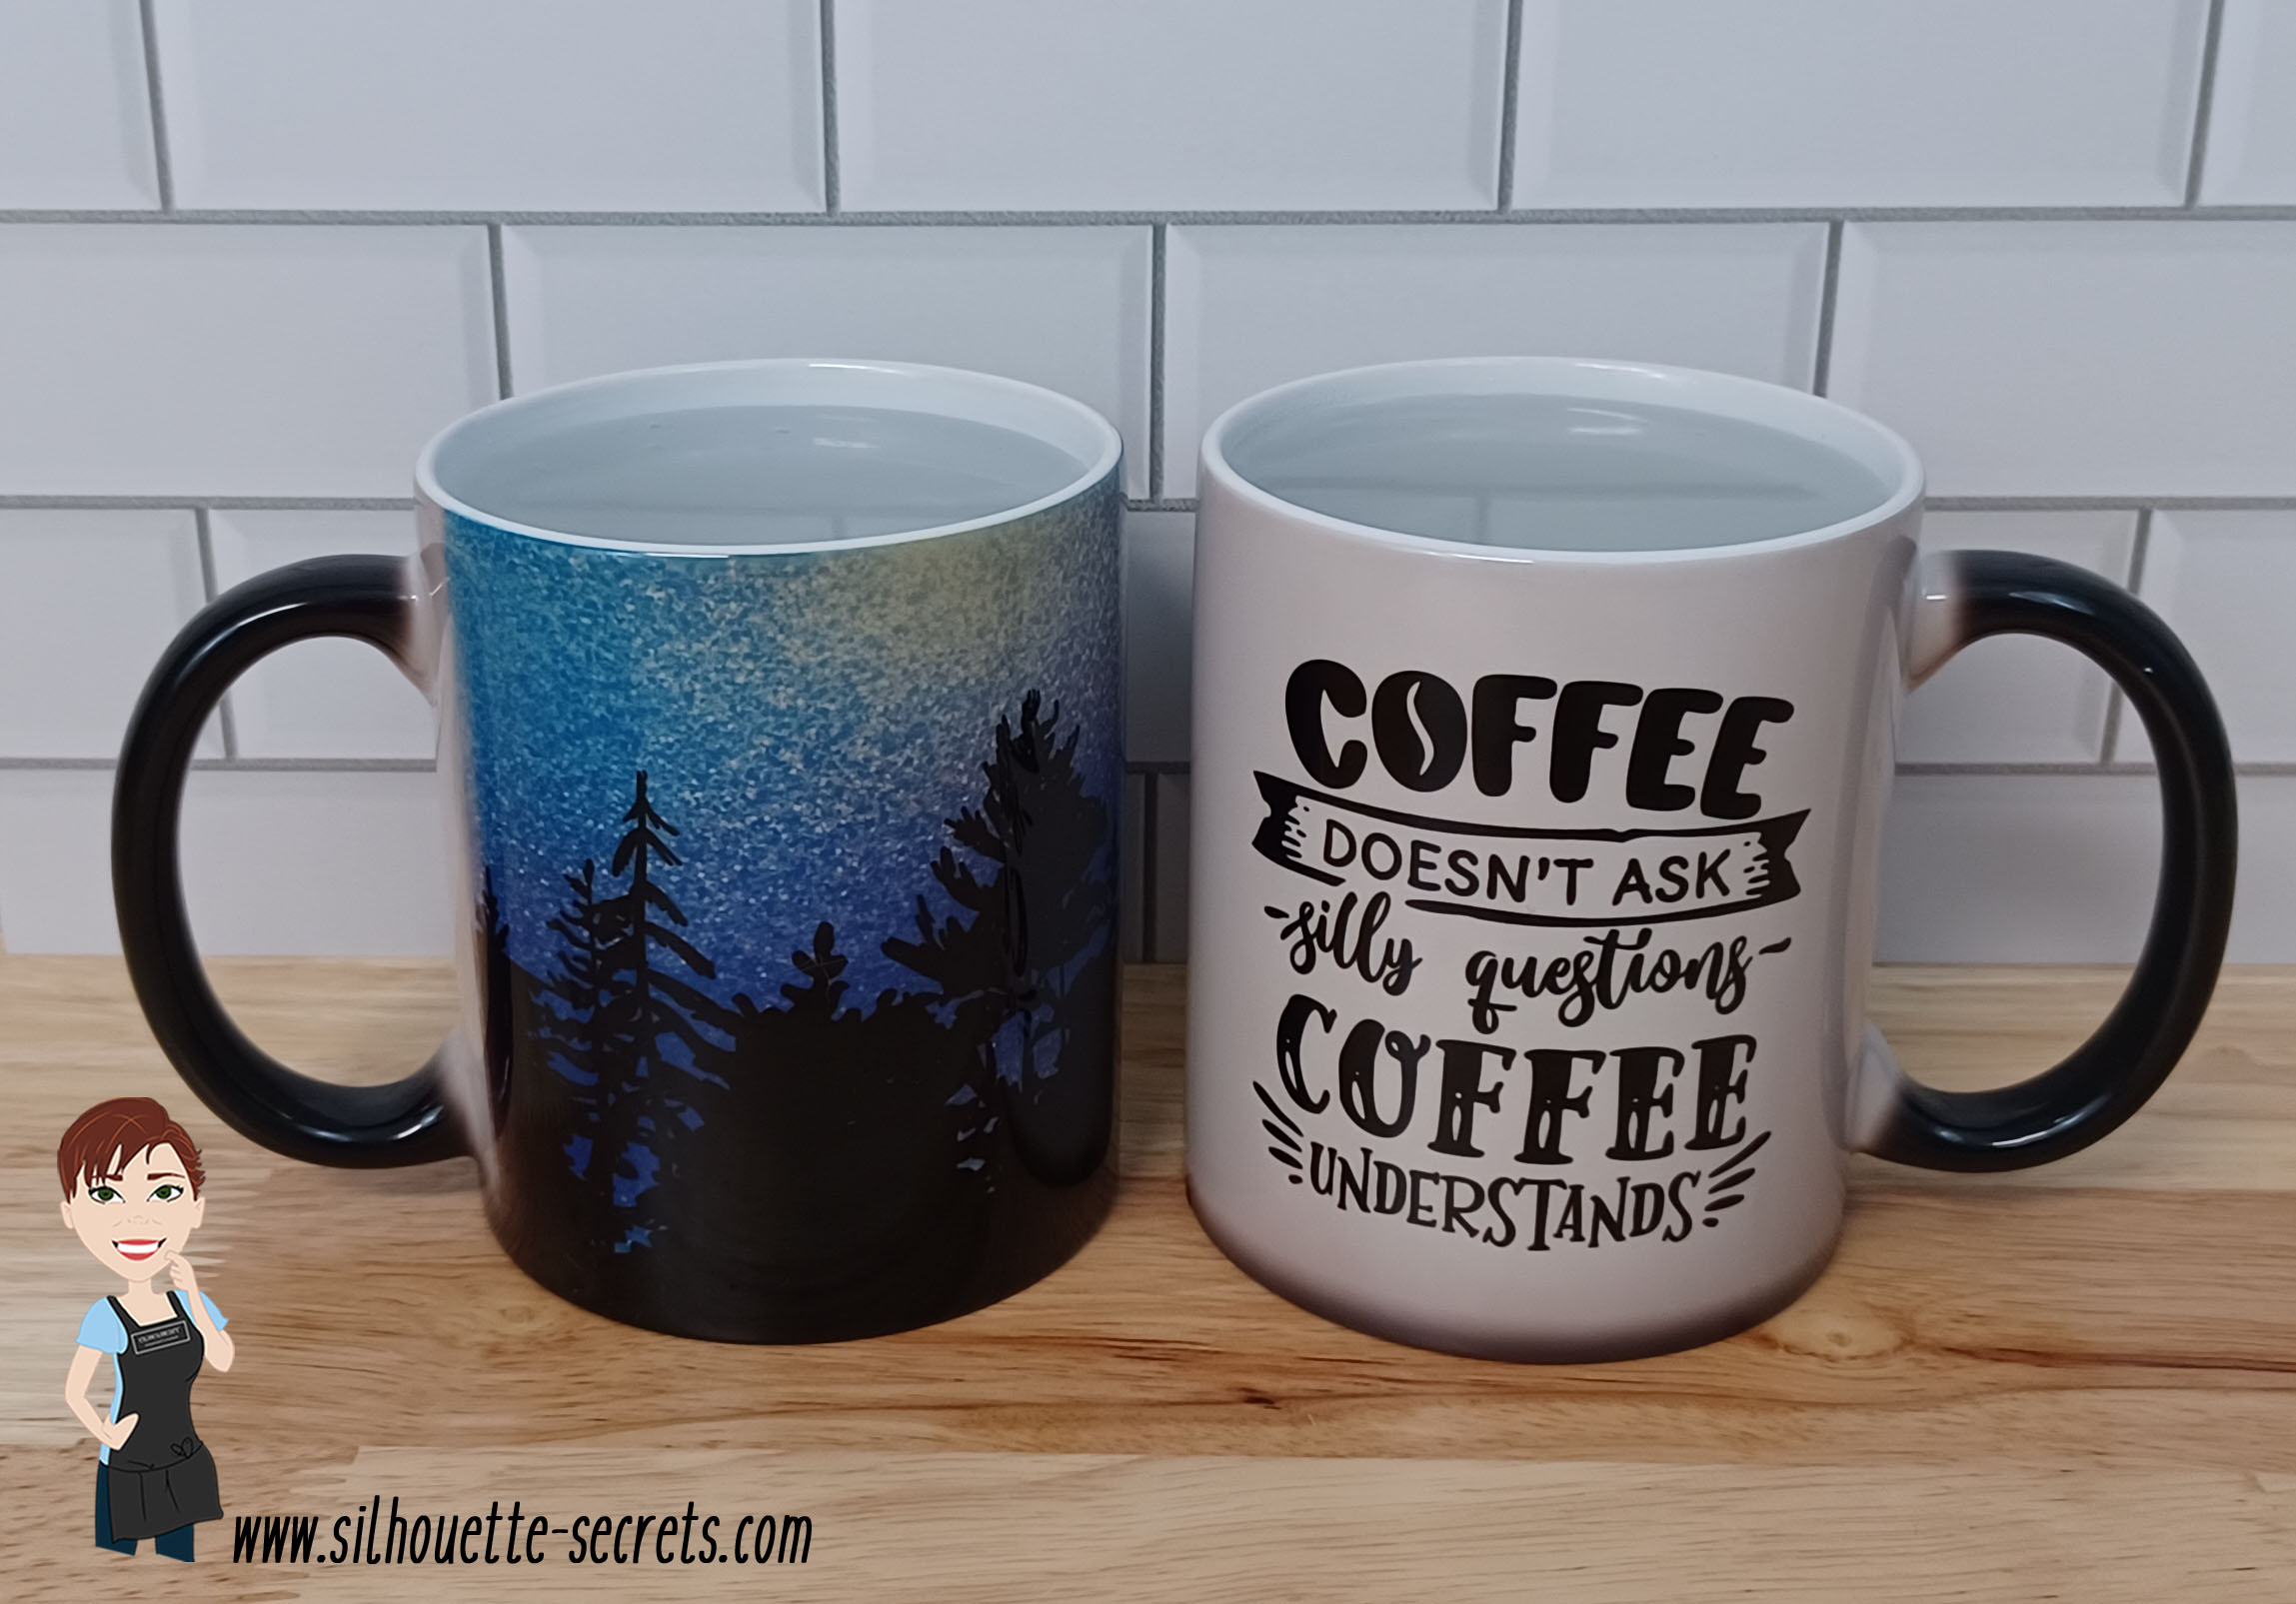 Sublimating a Color Changing Magic Mug Coffee Cup - Sublimation